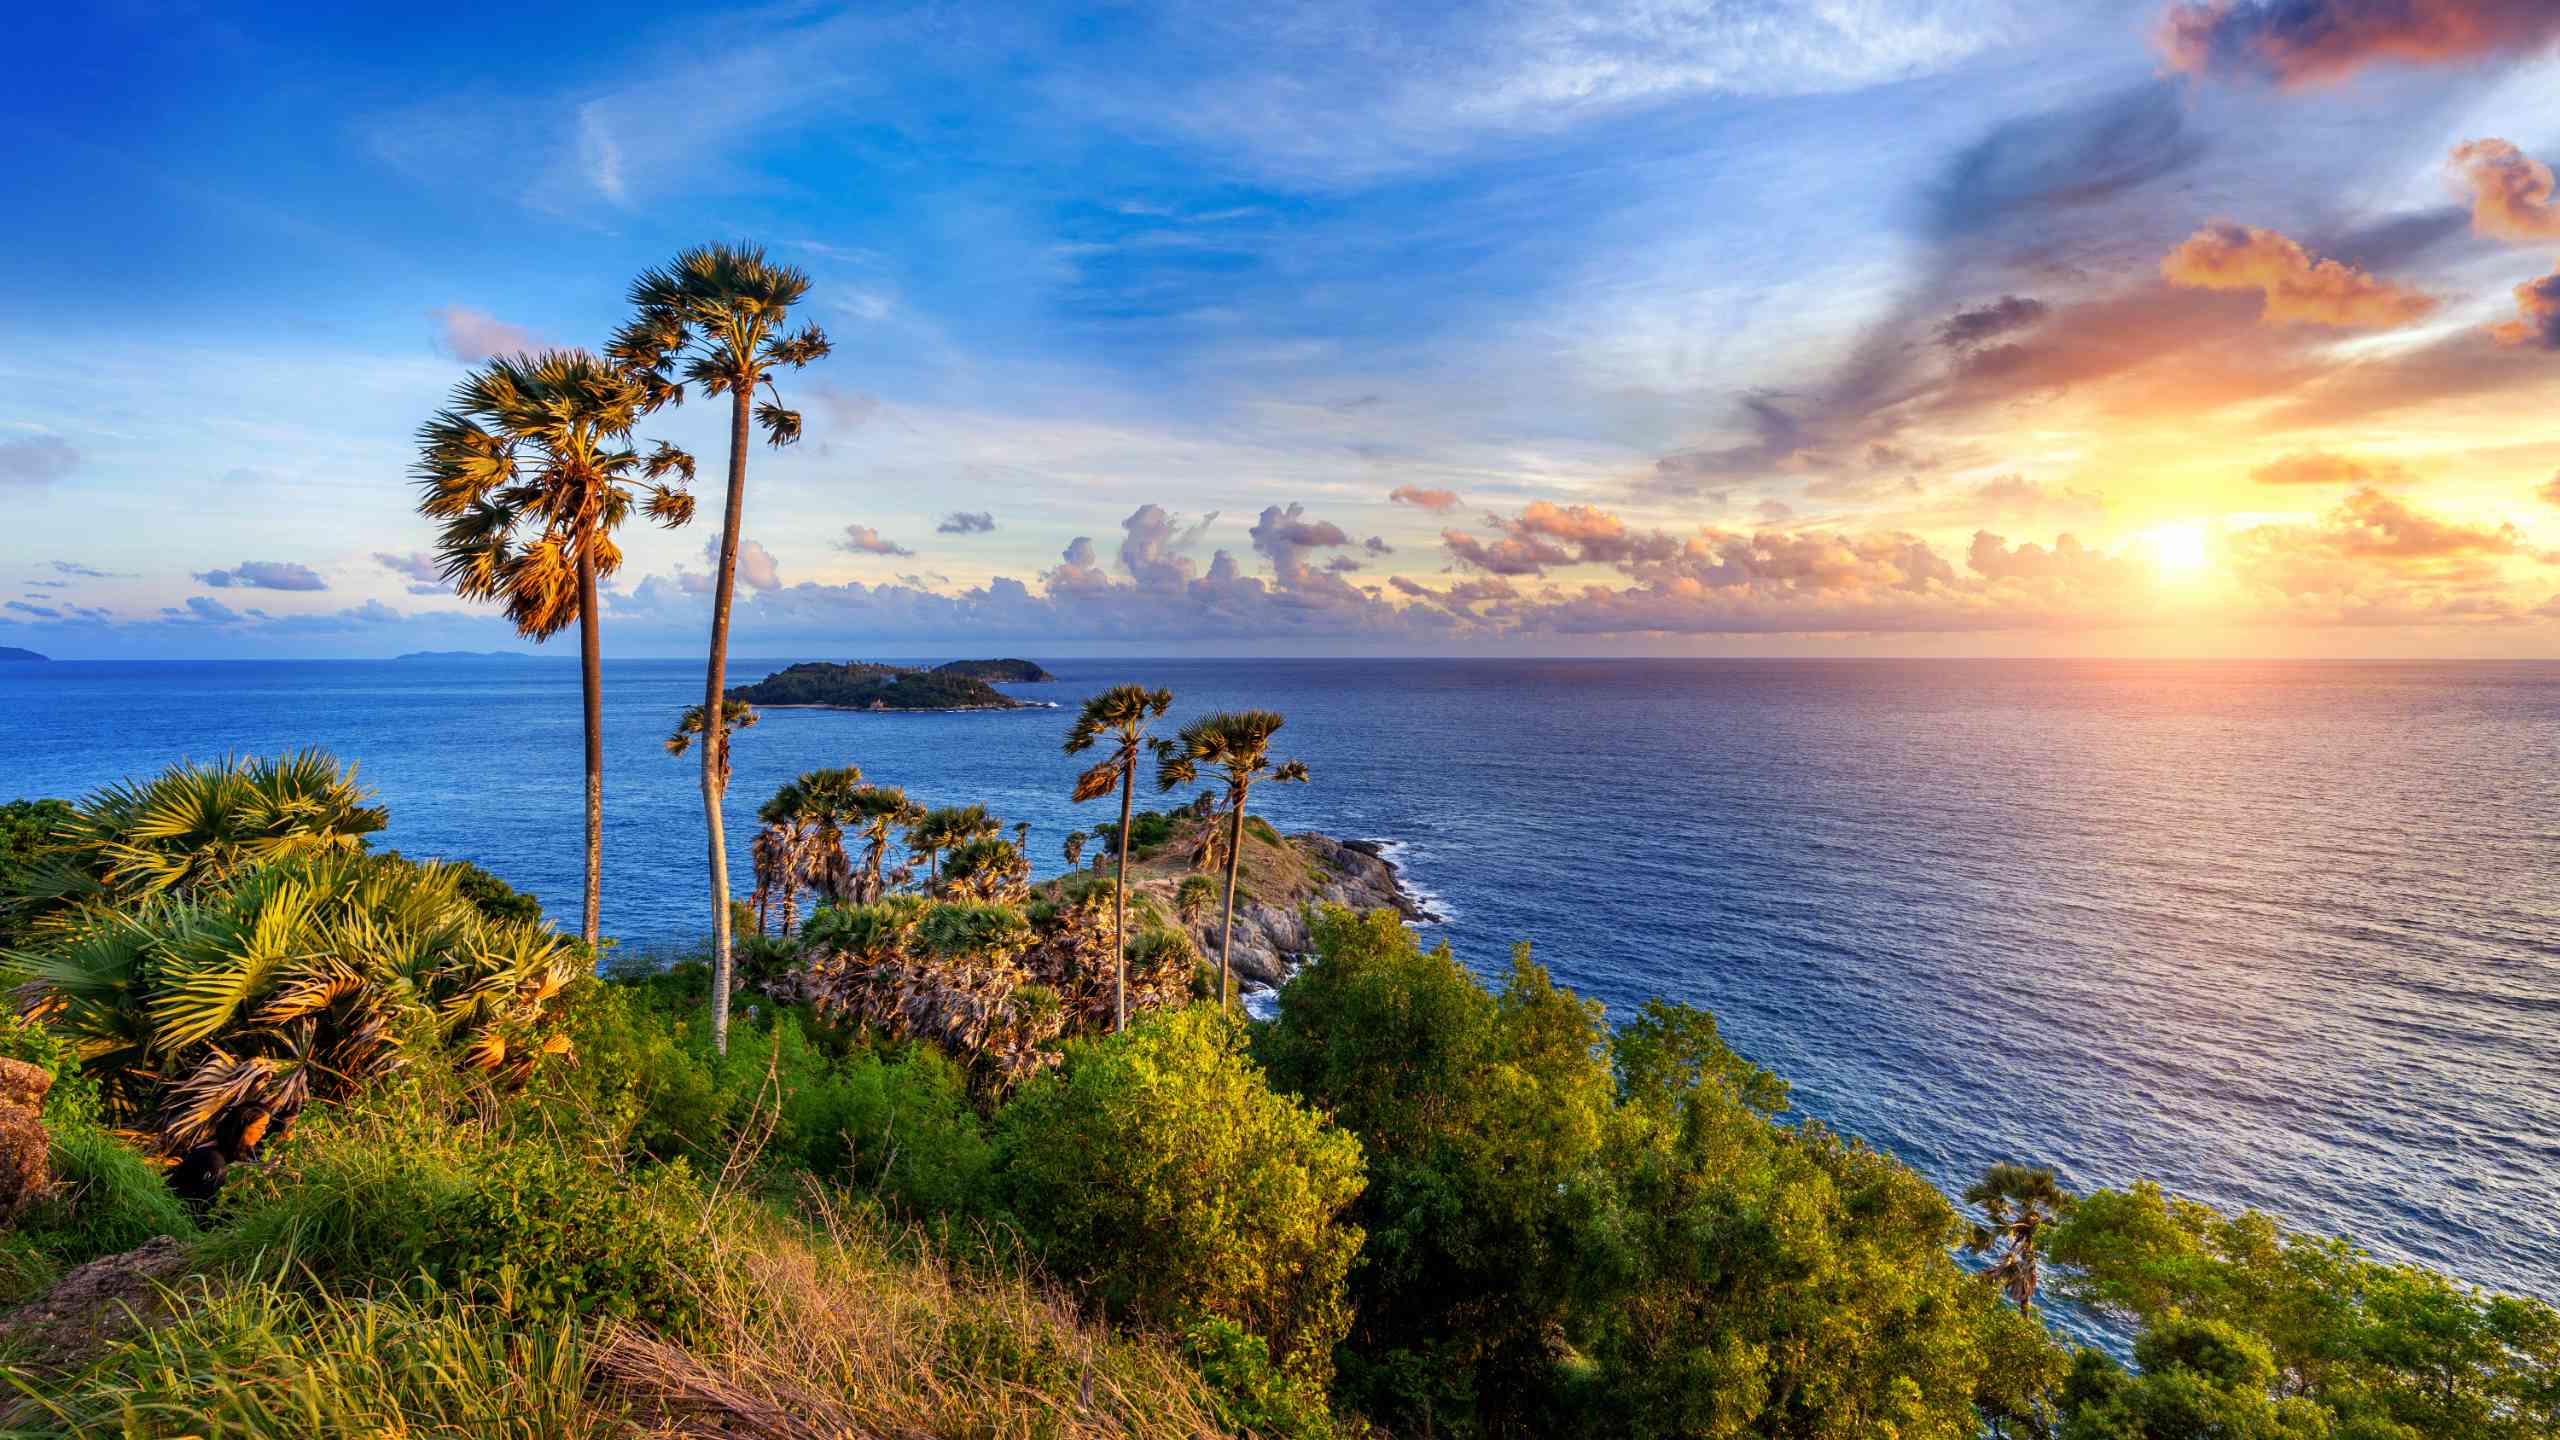 Promthep cape viewpoint at sunset in Phuket